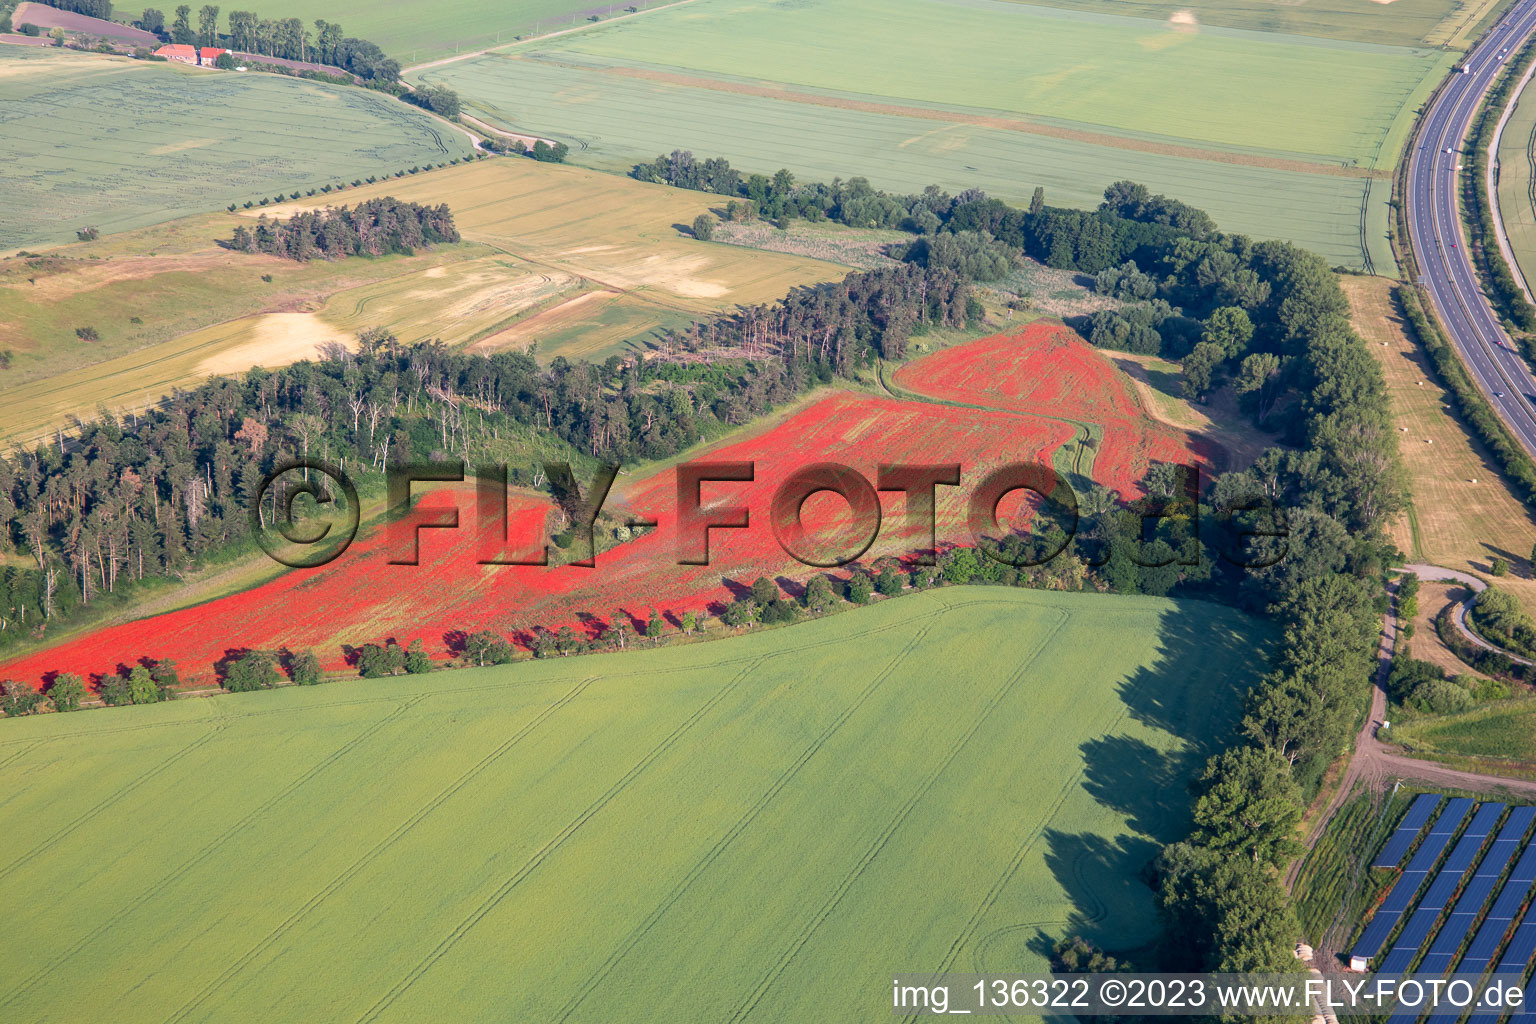 Aerial view of Corn poppy fields in the district Westerhausen in Thale in the state Saxony-Anhalt, Germany